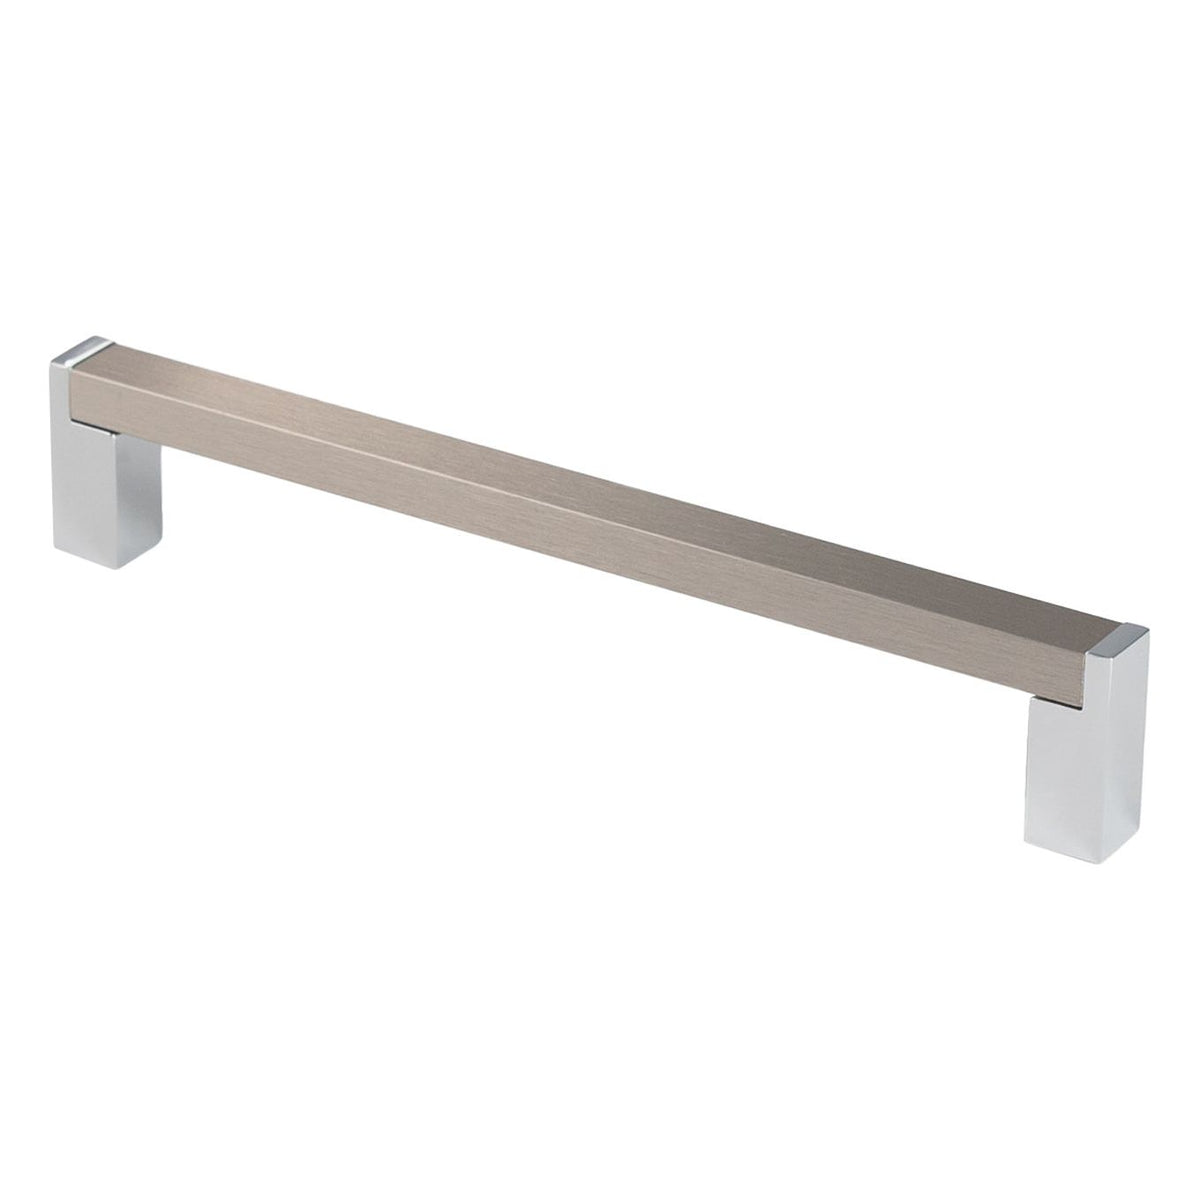 Rocheleau - POI-R2004-160-PC-BSN - Shopify - 3.21 - Chrome and Brushed Nickel